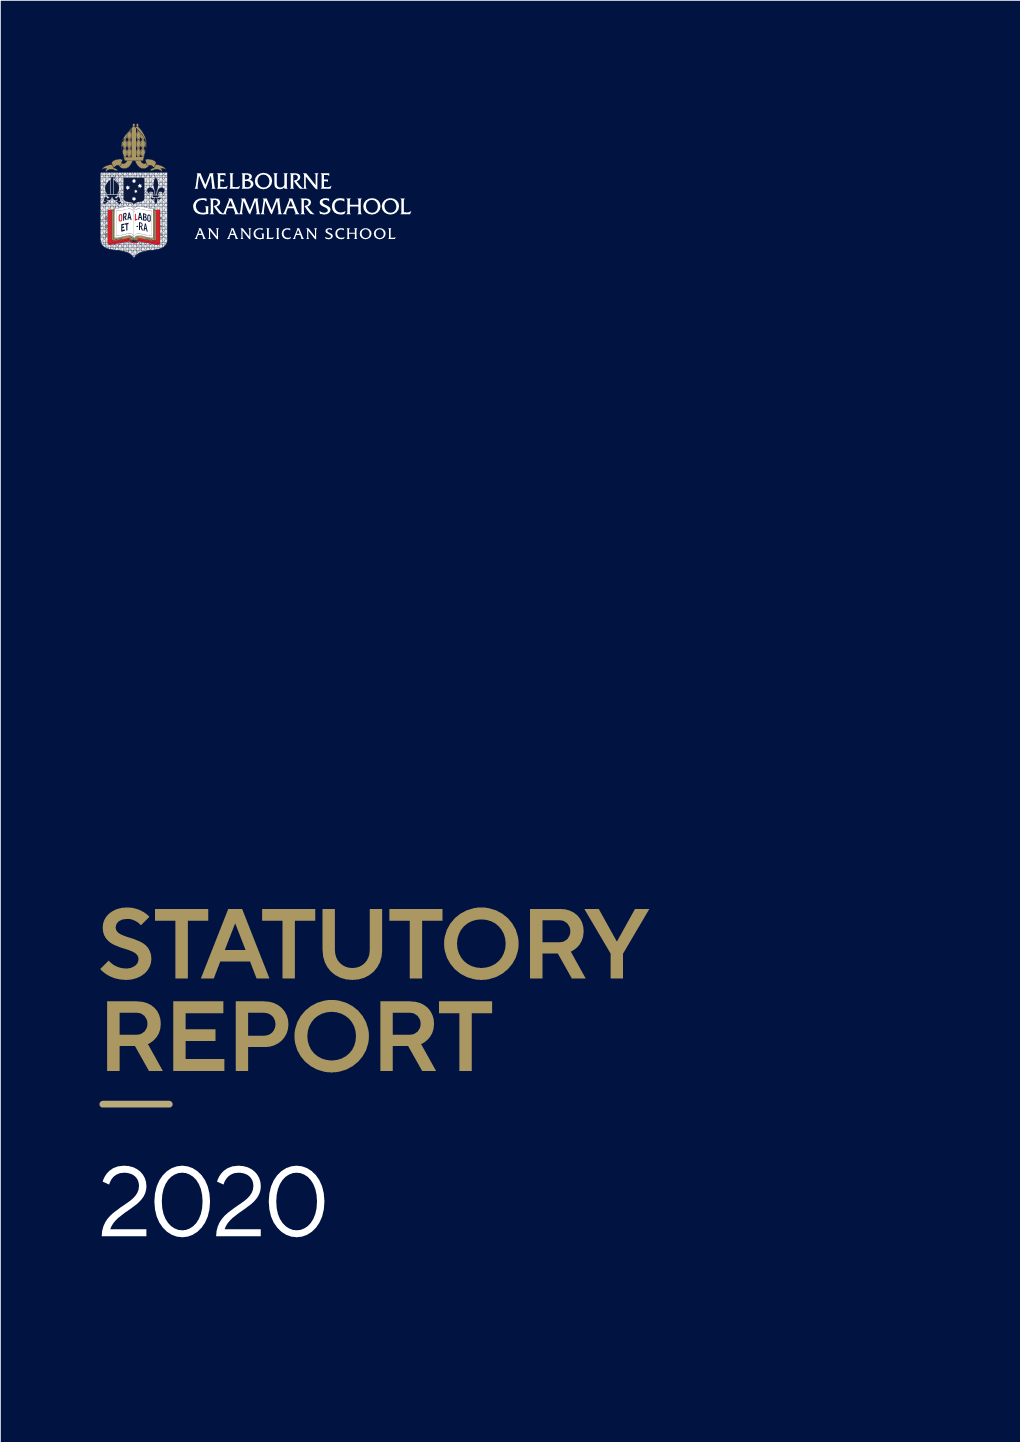 STATUTORY REPORT 2020 Melbourne Grammar School Is One of Australia’S Leading Independent Schools, with a Tradition of Excellence Extending Over More Than 160 Years